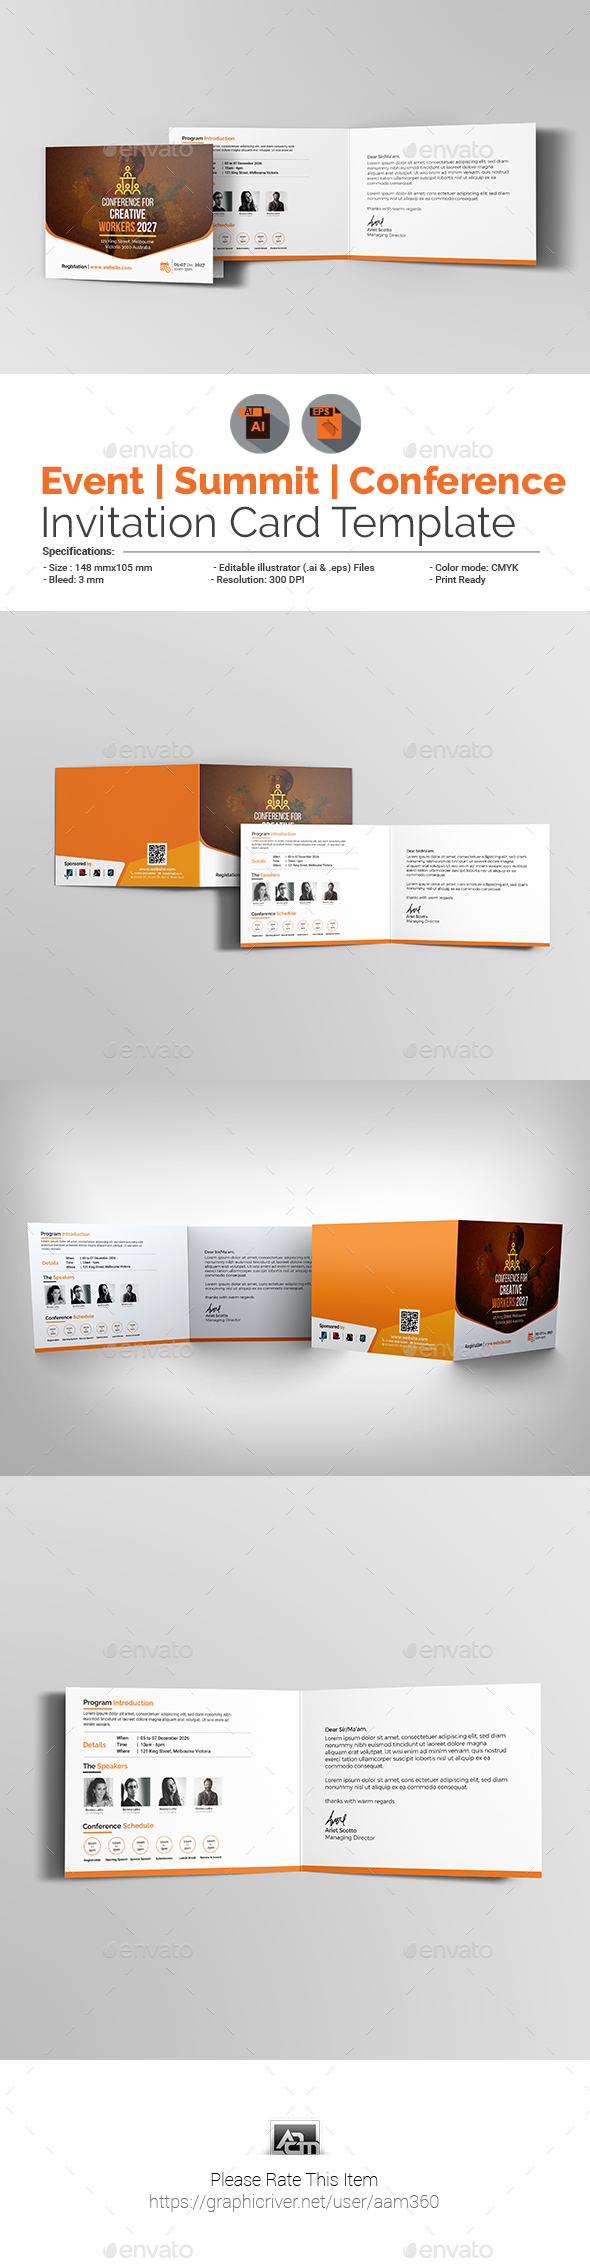 Event/Conference Invitation Card Template With Seminar Invitation Card Template